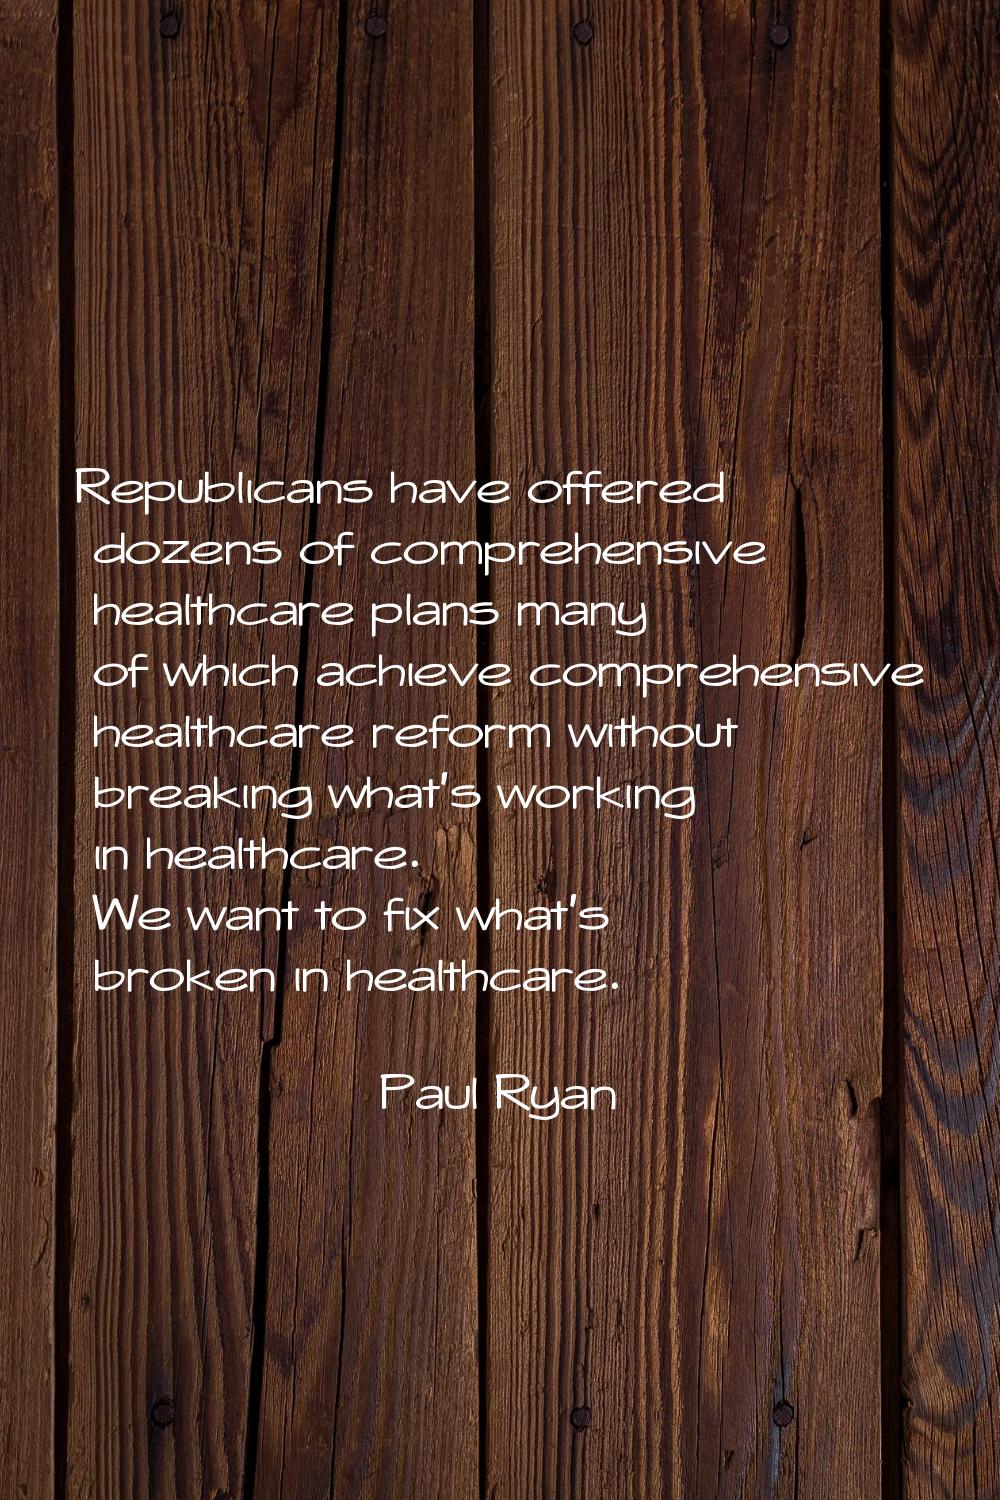 Republicans have offered dozens of comprehensive healthcare plans many of which achieve comprehensi